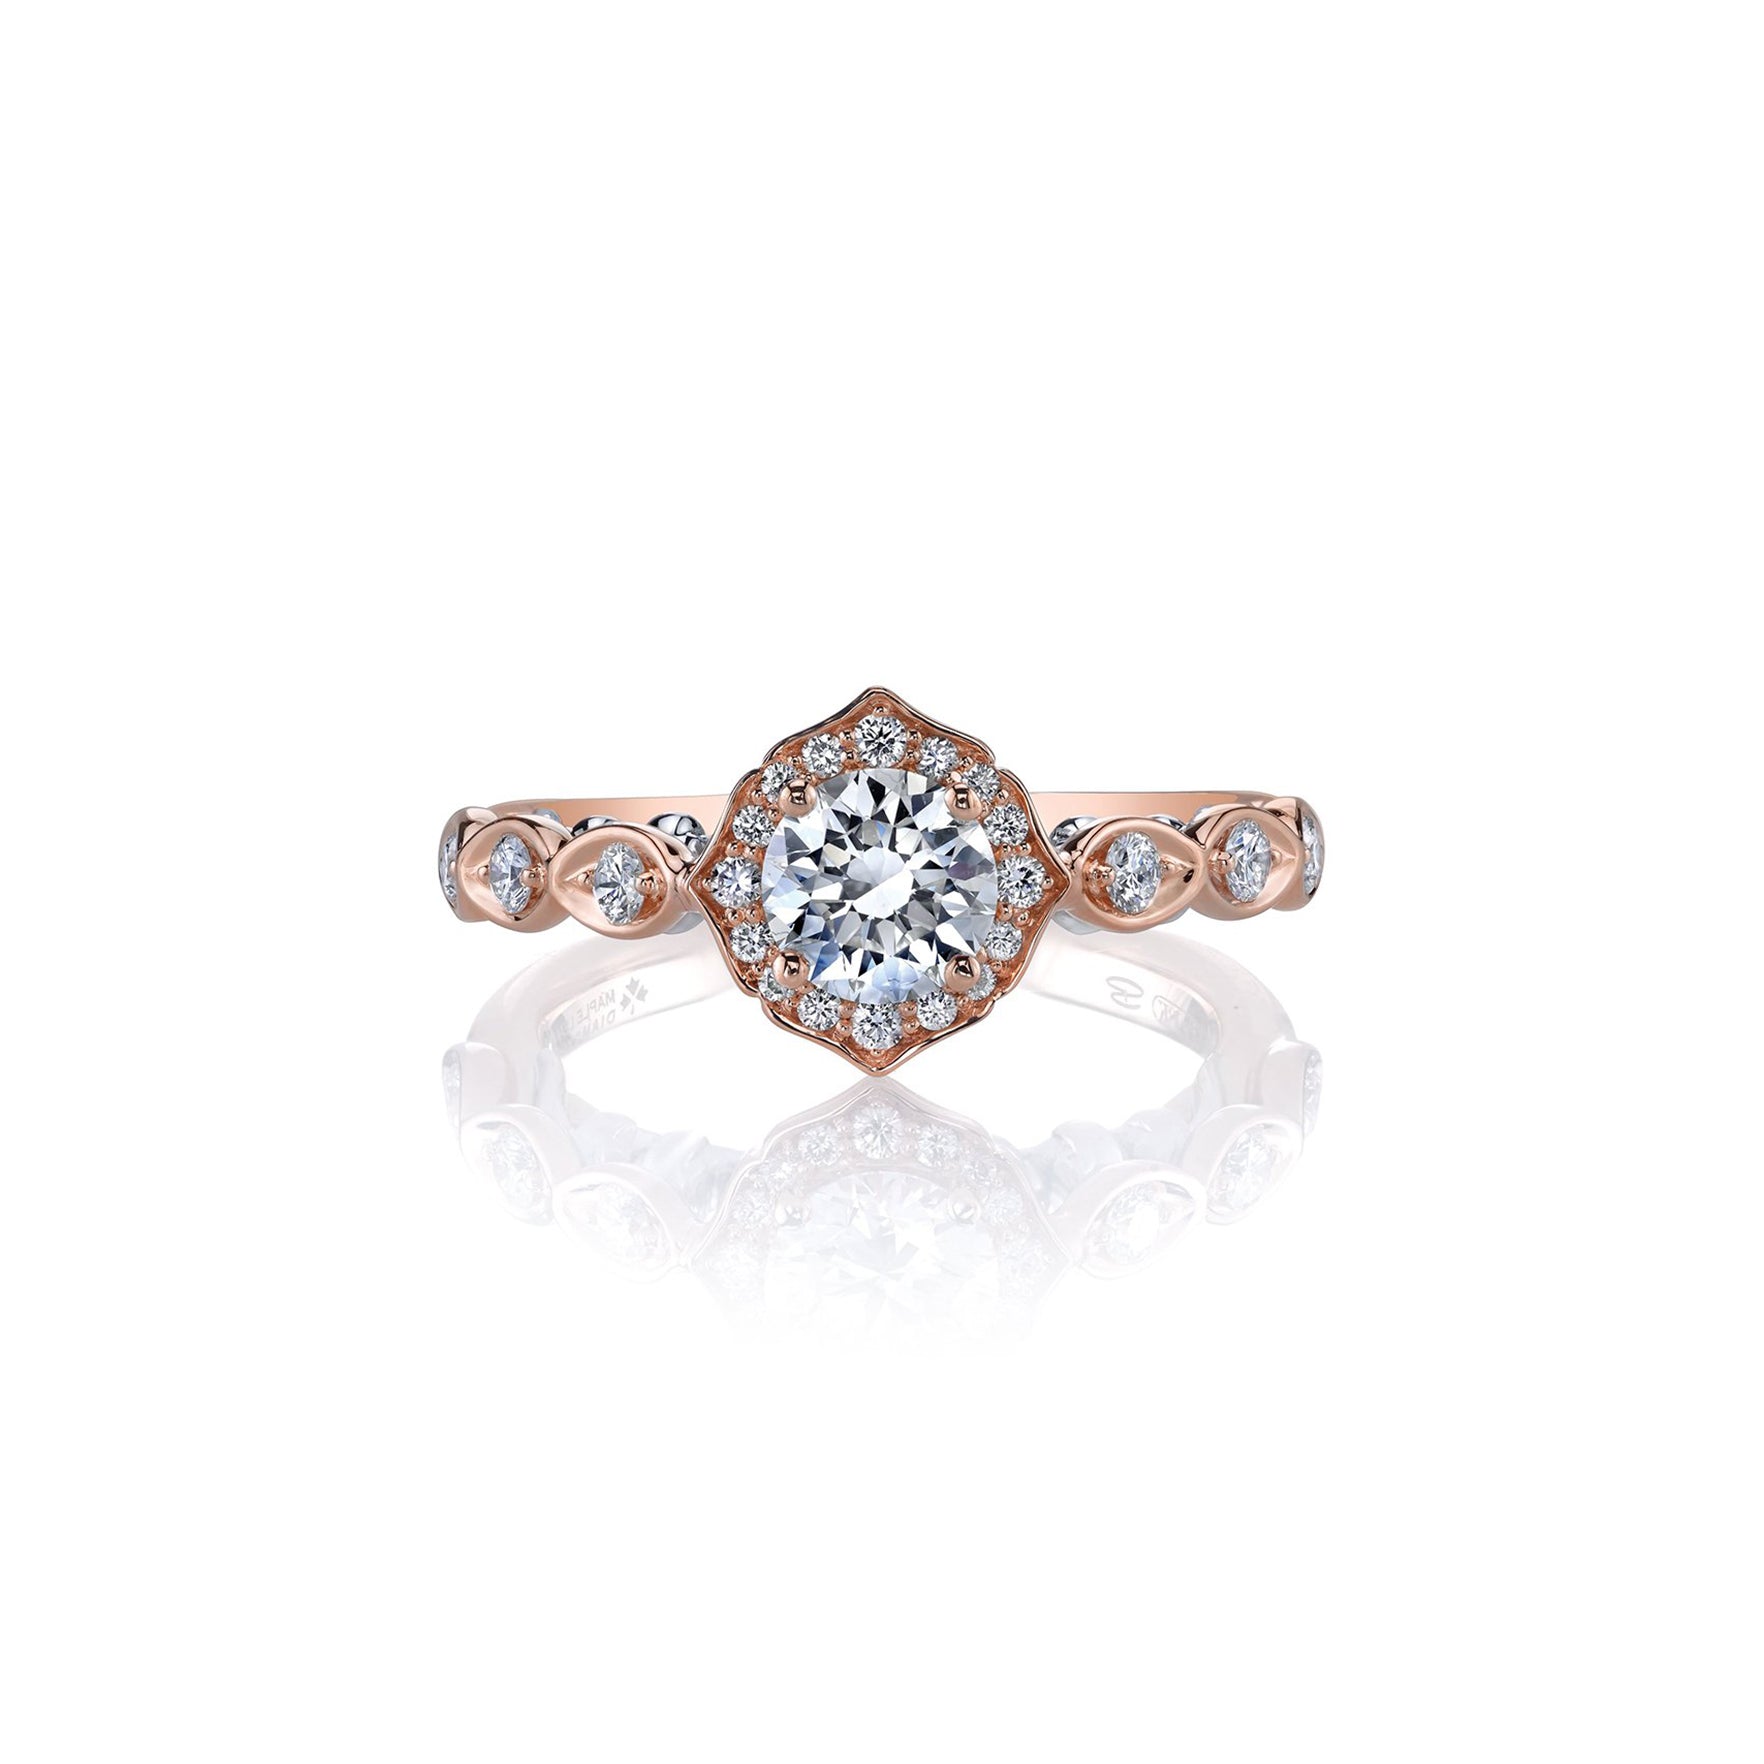 Crafted in 18KT rose and white gold, this lily of the valley flower-inspired ring is set with Canadian diamonds. 